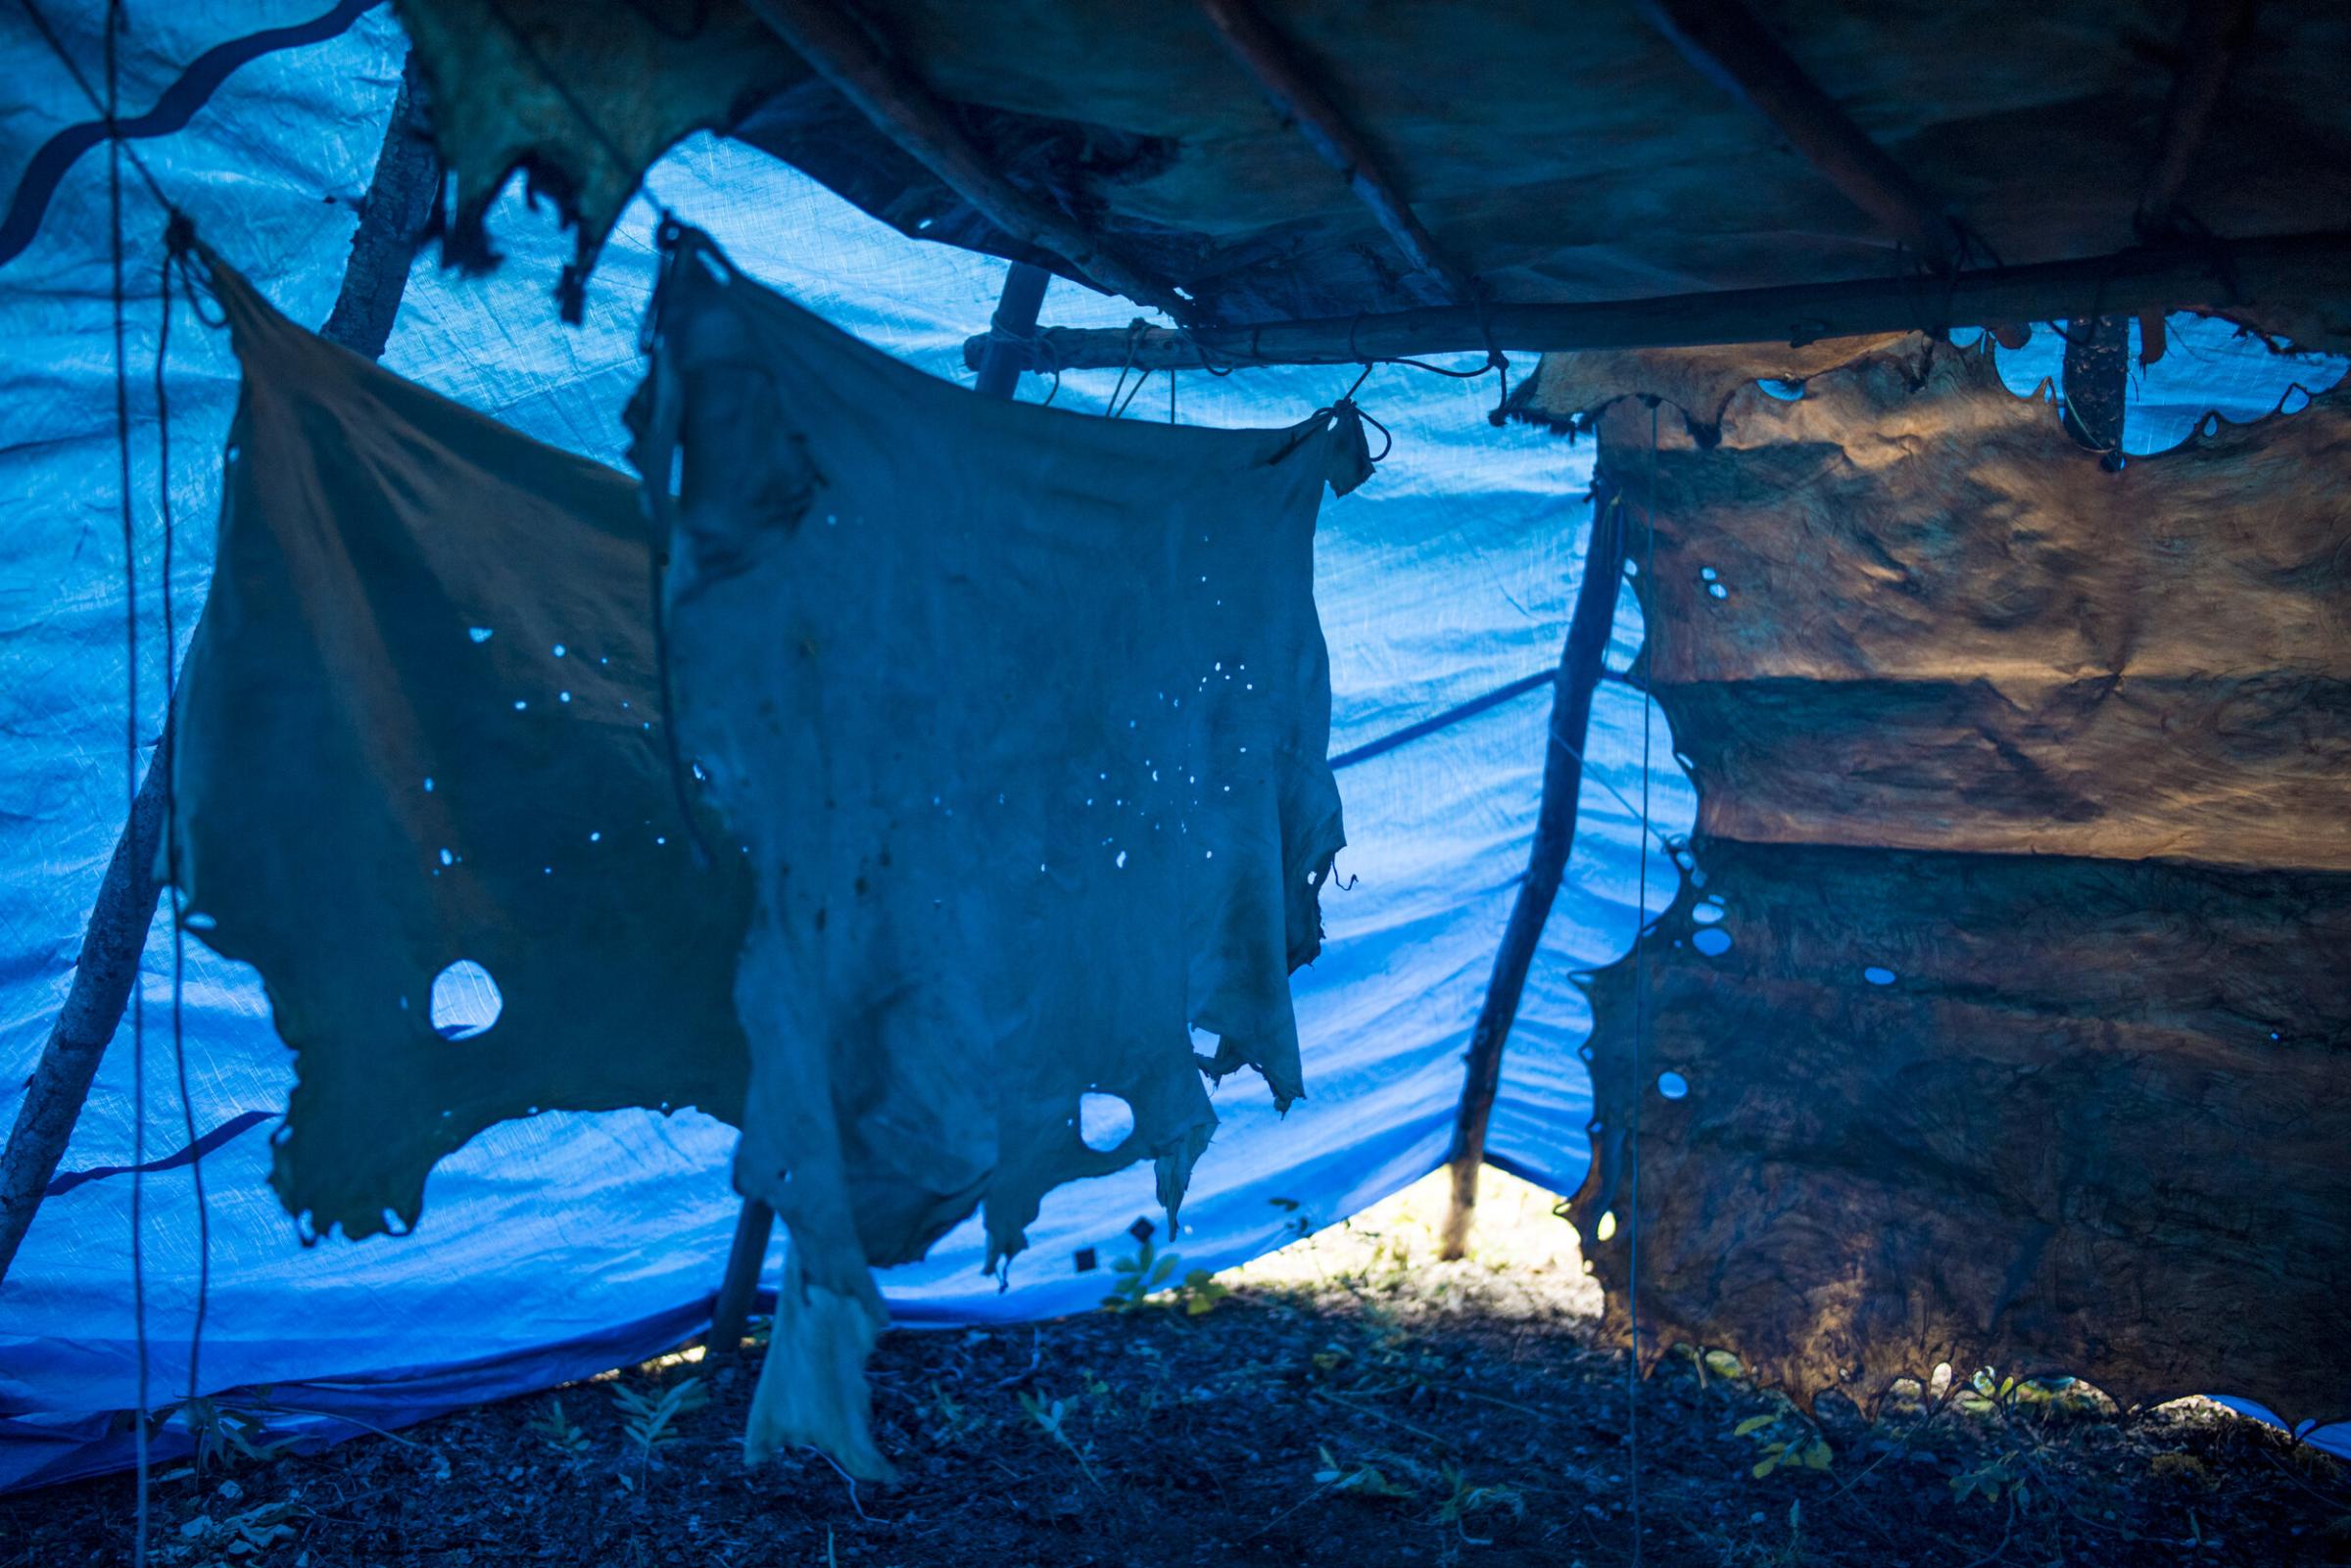 Here Is Where We Shall Stay - Moose hides dry and are tanned by the smoke inside a tipi...